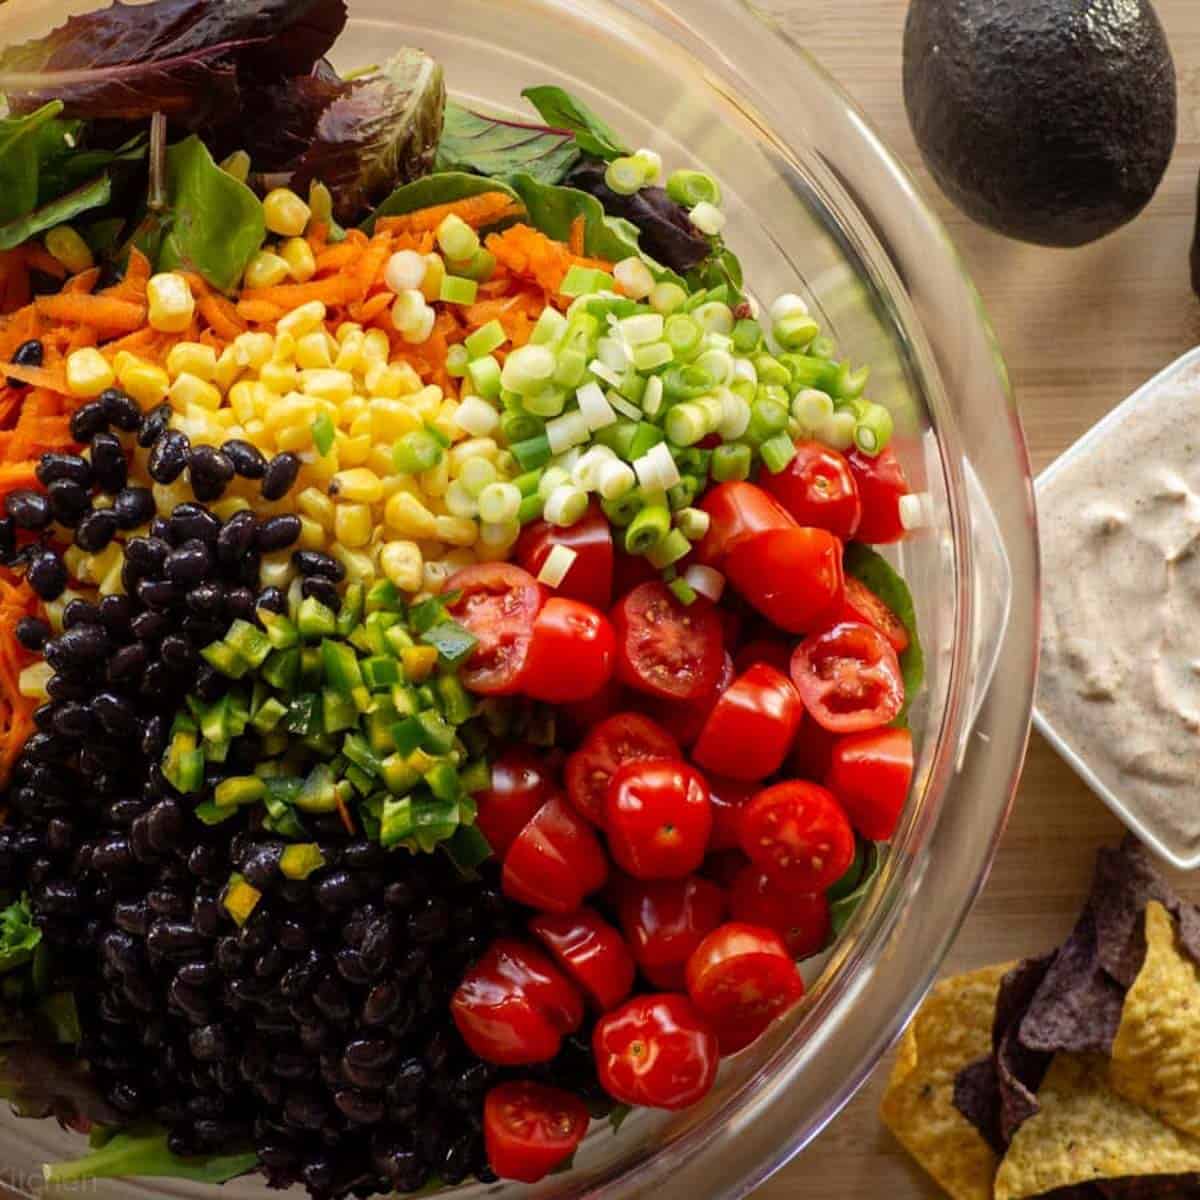 veggies in salad bowl next to some tortilla chips and small bowl of ranch.